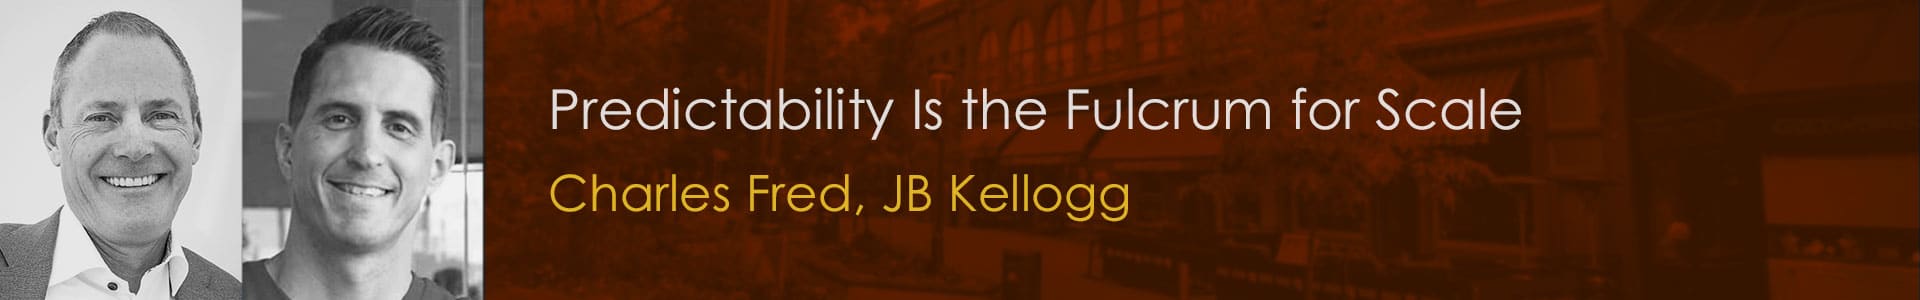 "Predictability is the Fulcrum of Scale" with Charles Fred and JB Kellogg.